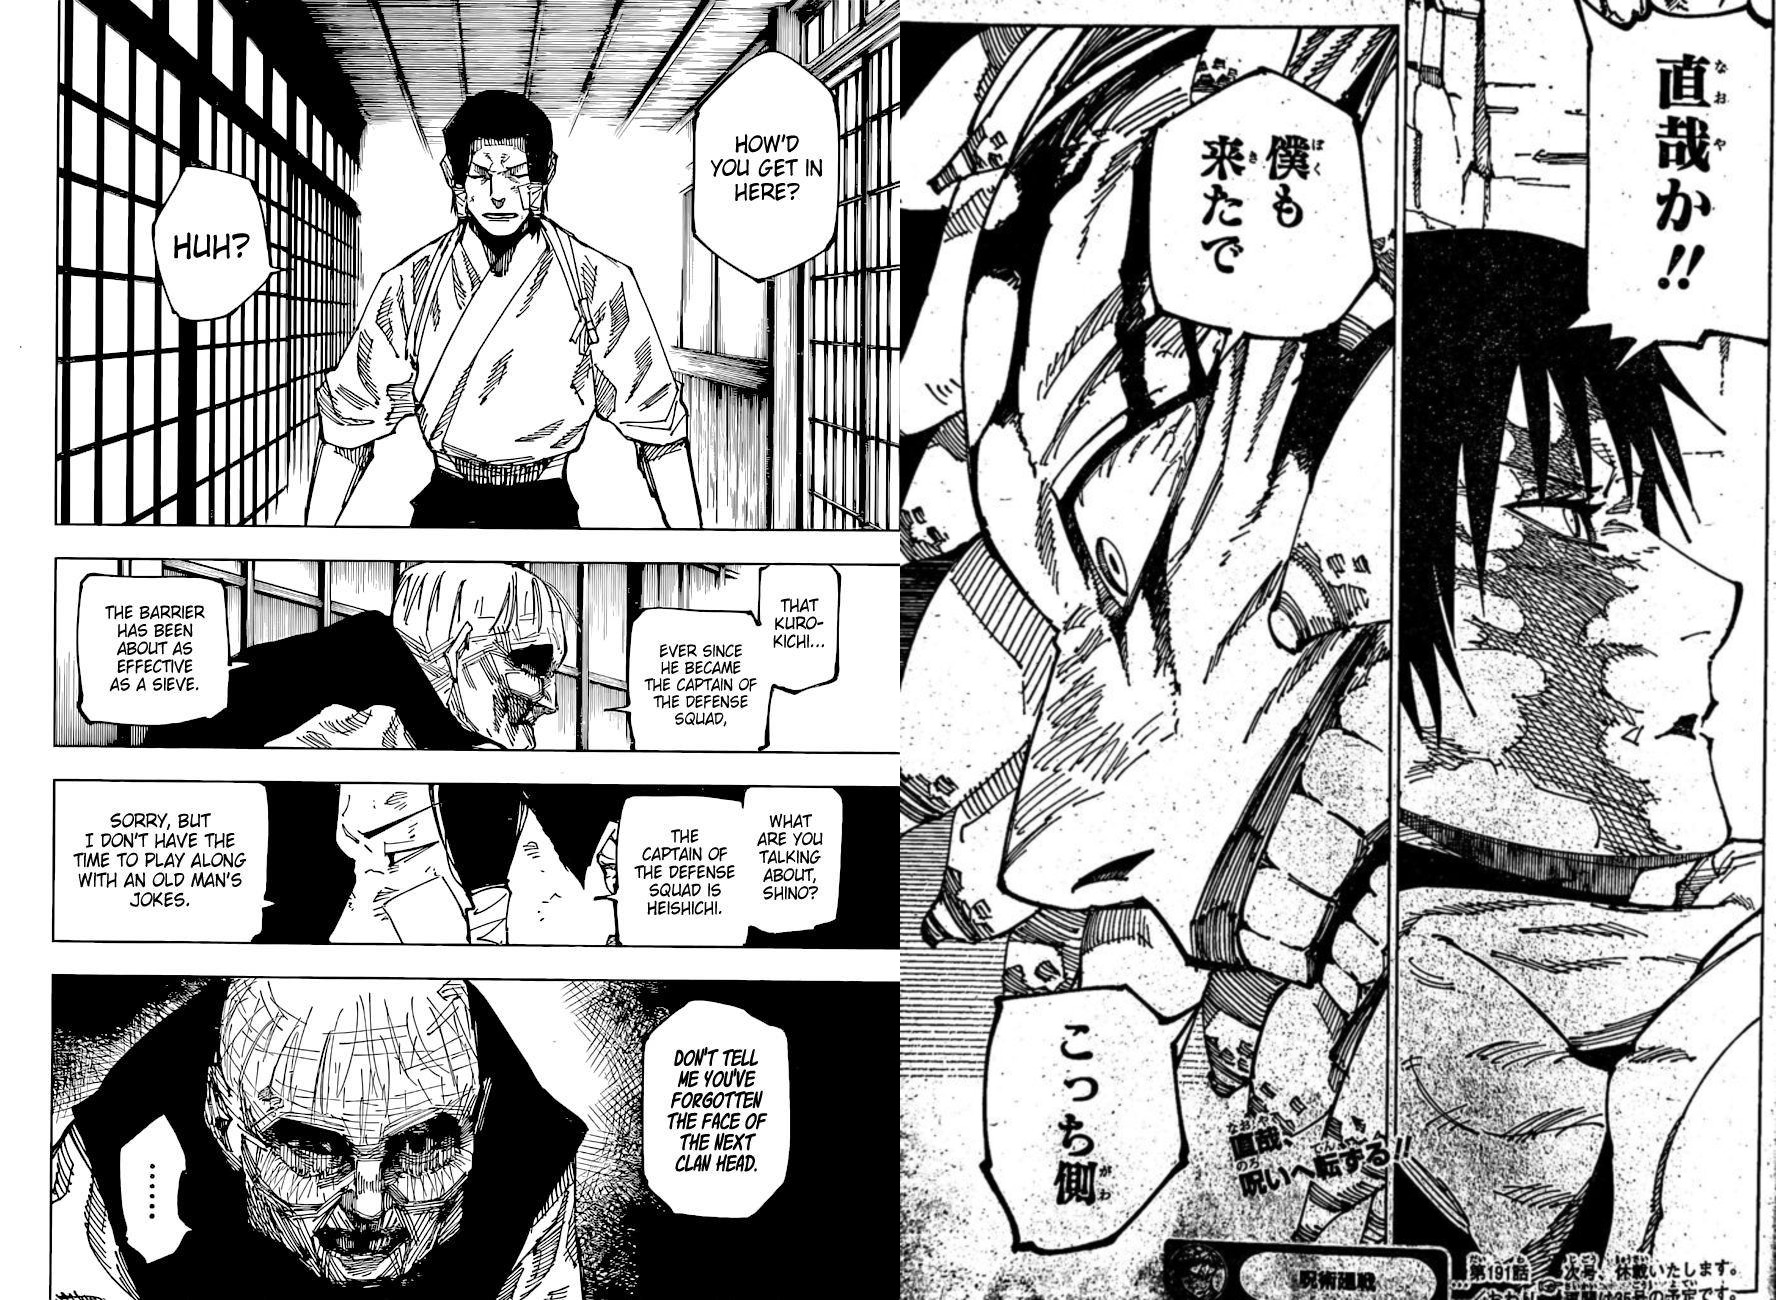 Jujutsu Kaisen Chapter 191 Where To Watch Spoilers Date & Time Raw Scans